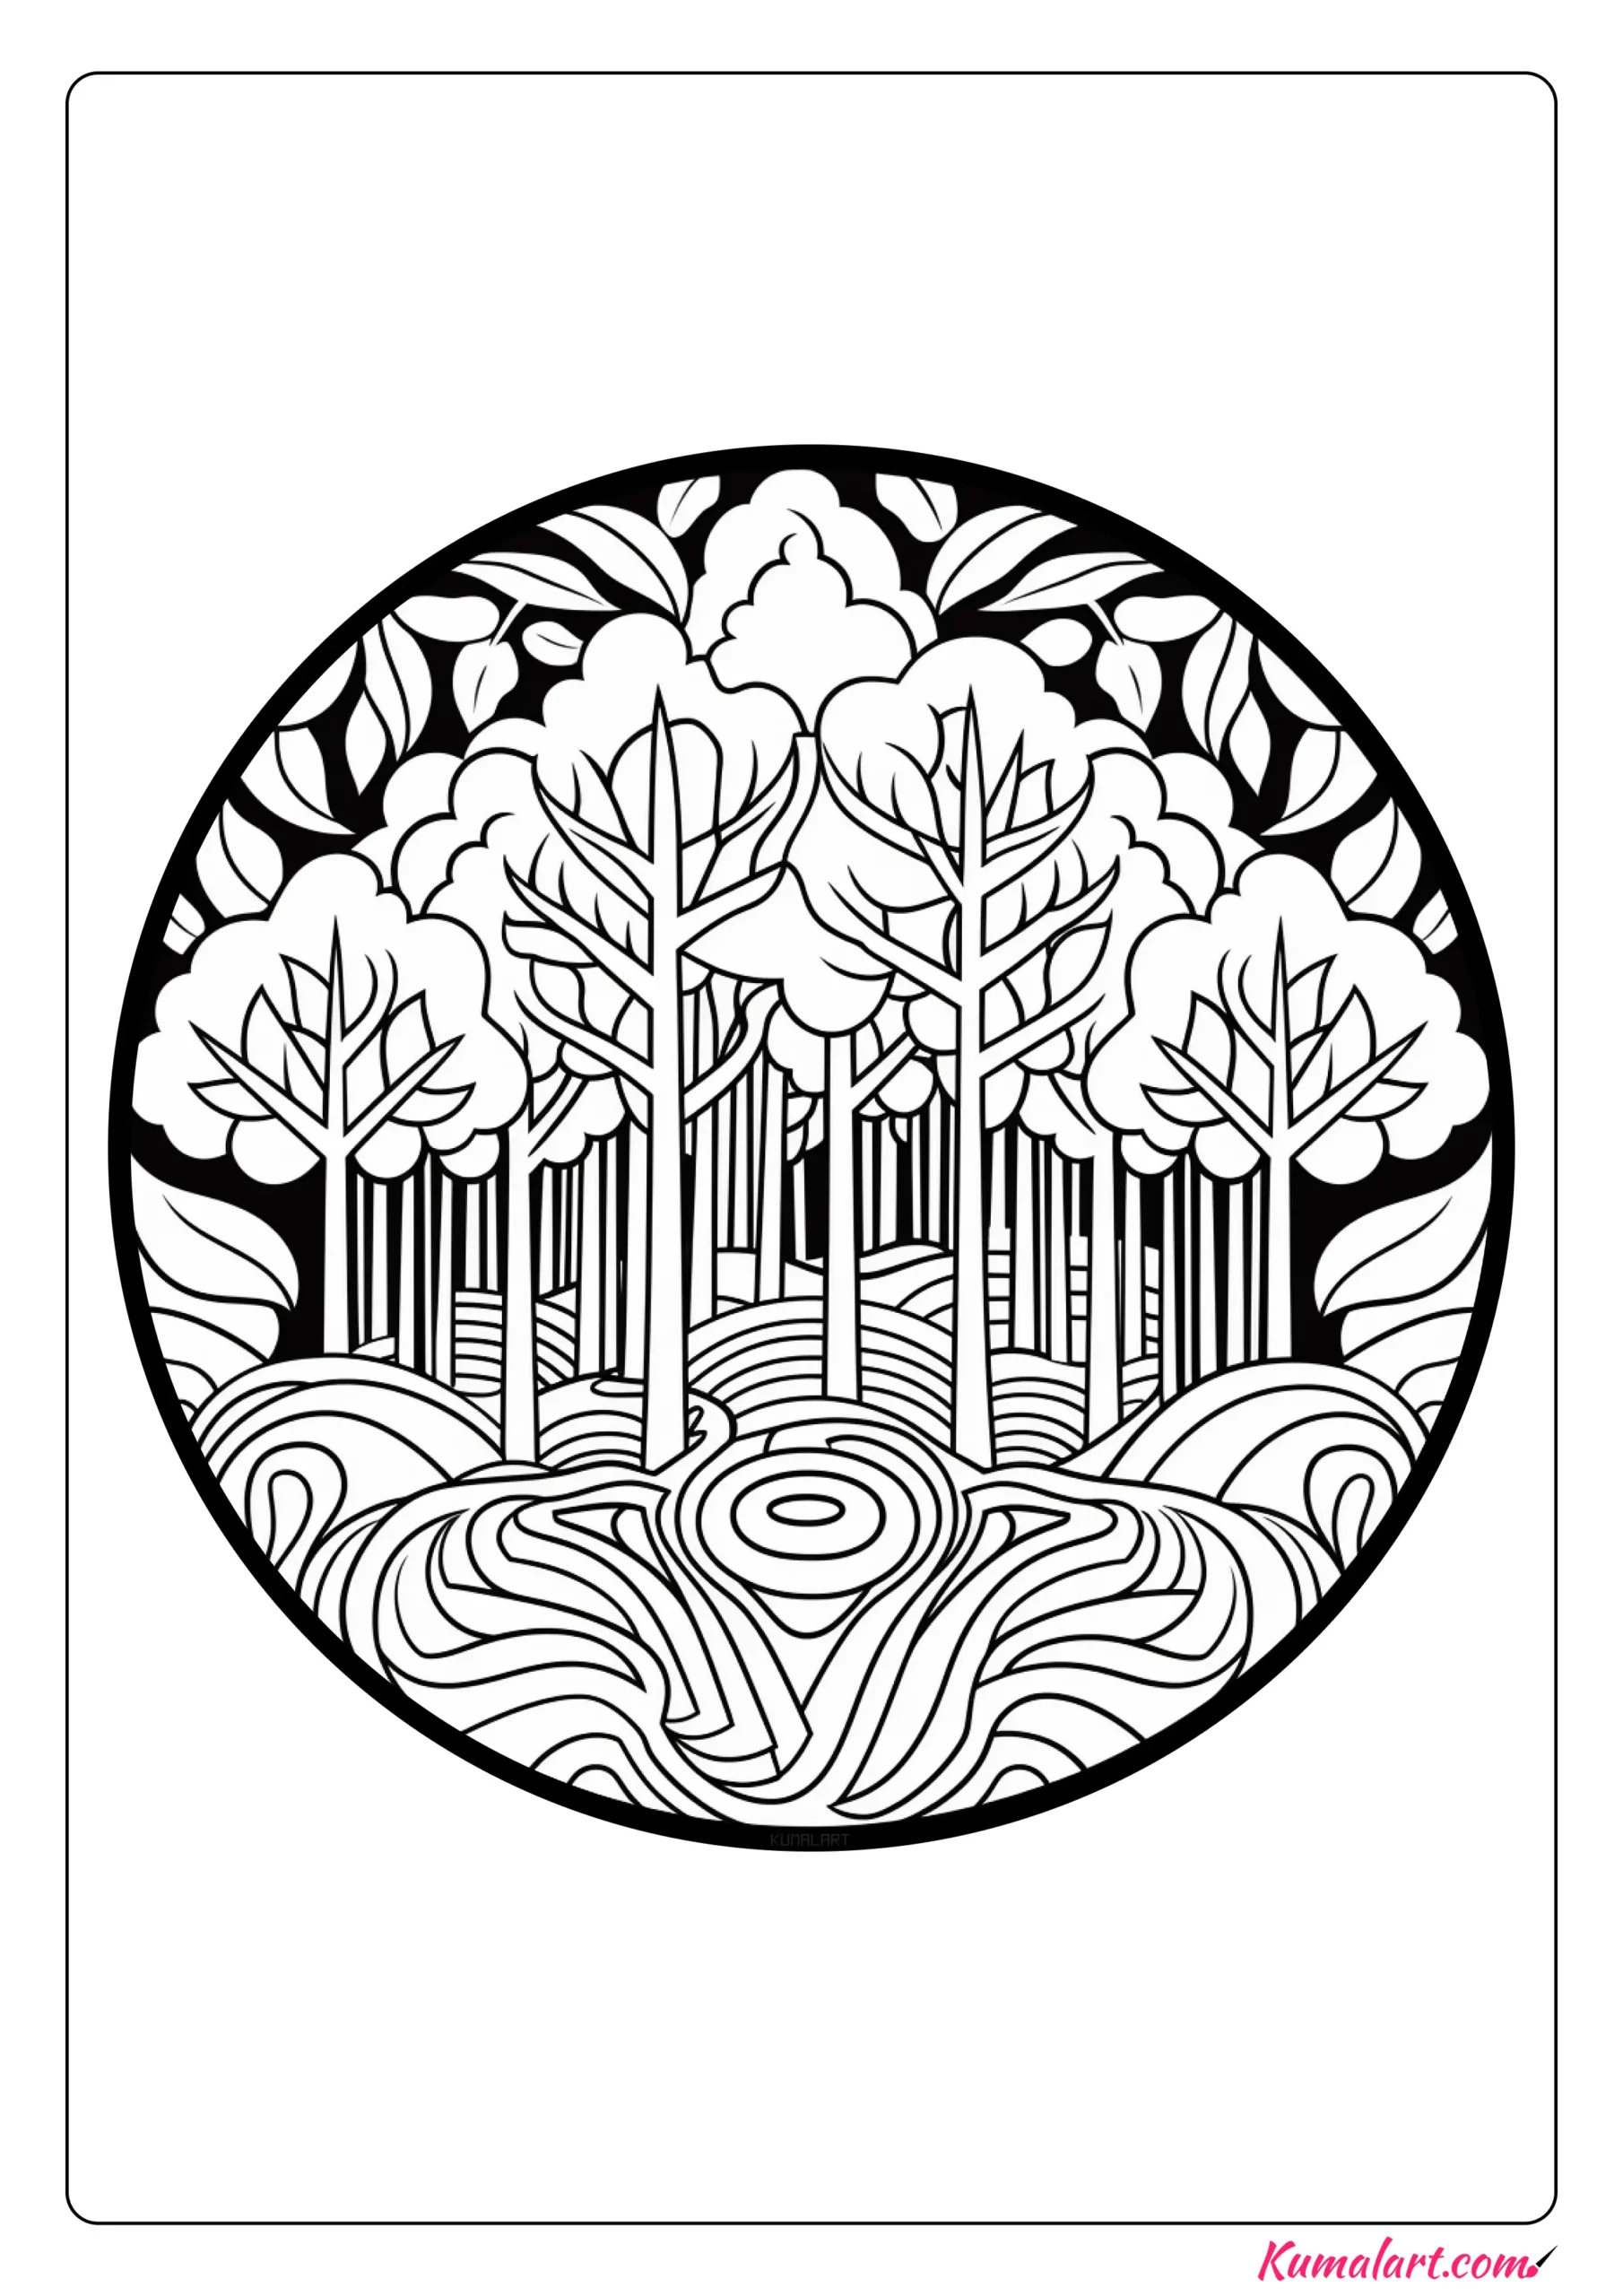 Whispering Forest Coloring Page